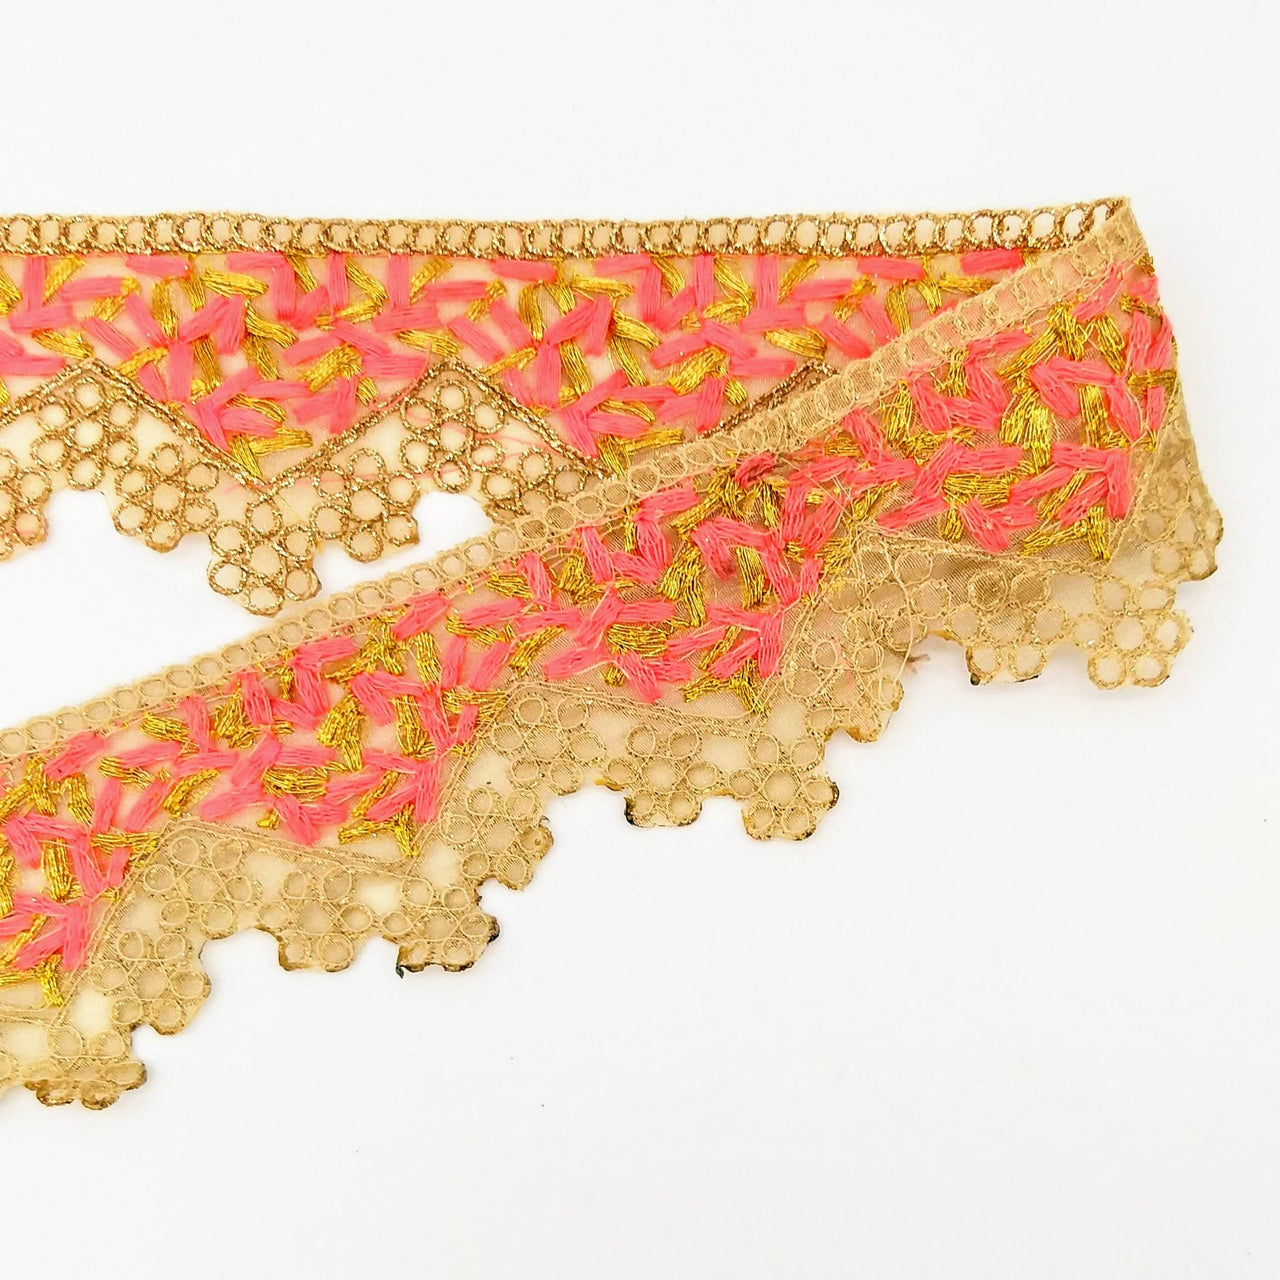 Gold Sheer Tissue Fabric Cutwork Trim with Embroidery in Gold and Salmon Pink, Scallop Trim, Fringe Trim